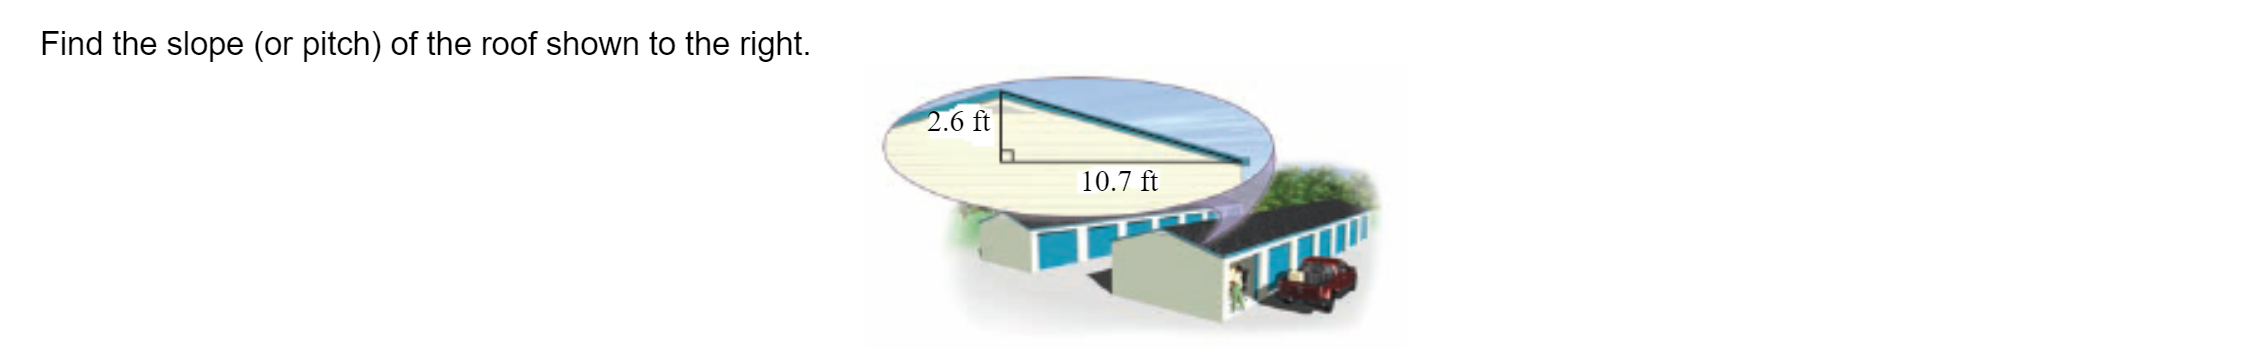 Find the slope (or pitch) of the roof shown to the right.
2.6 ft
10.7 ft
